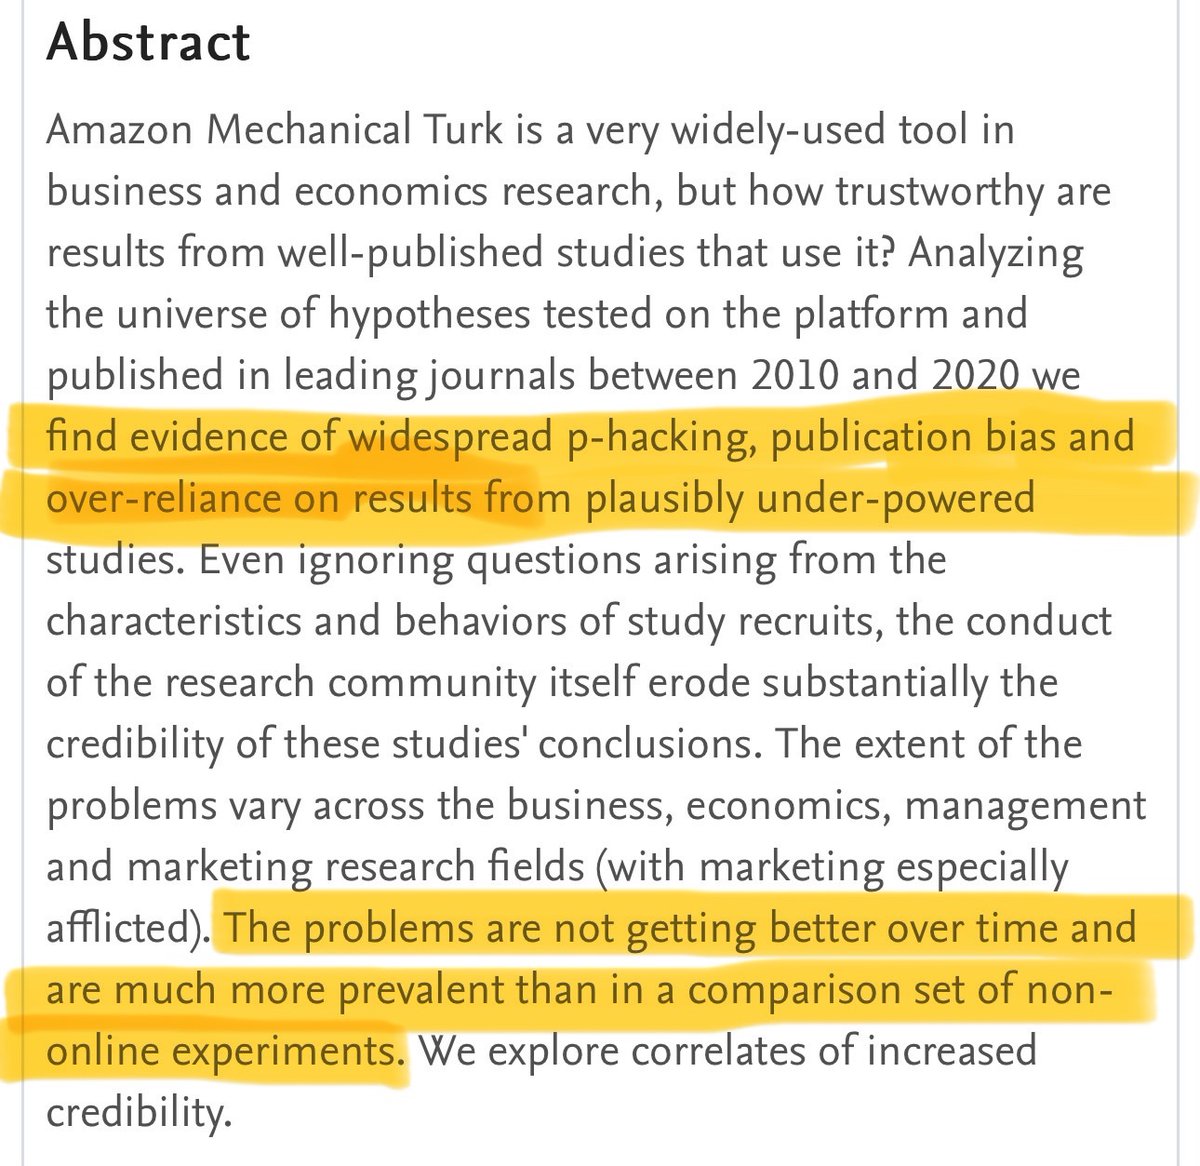 Mechanical Turk greatly lowered the costs of running experiments. Instead of generating new knowledge, researchers used it to publish false positives. So depressing and embarrassing.